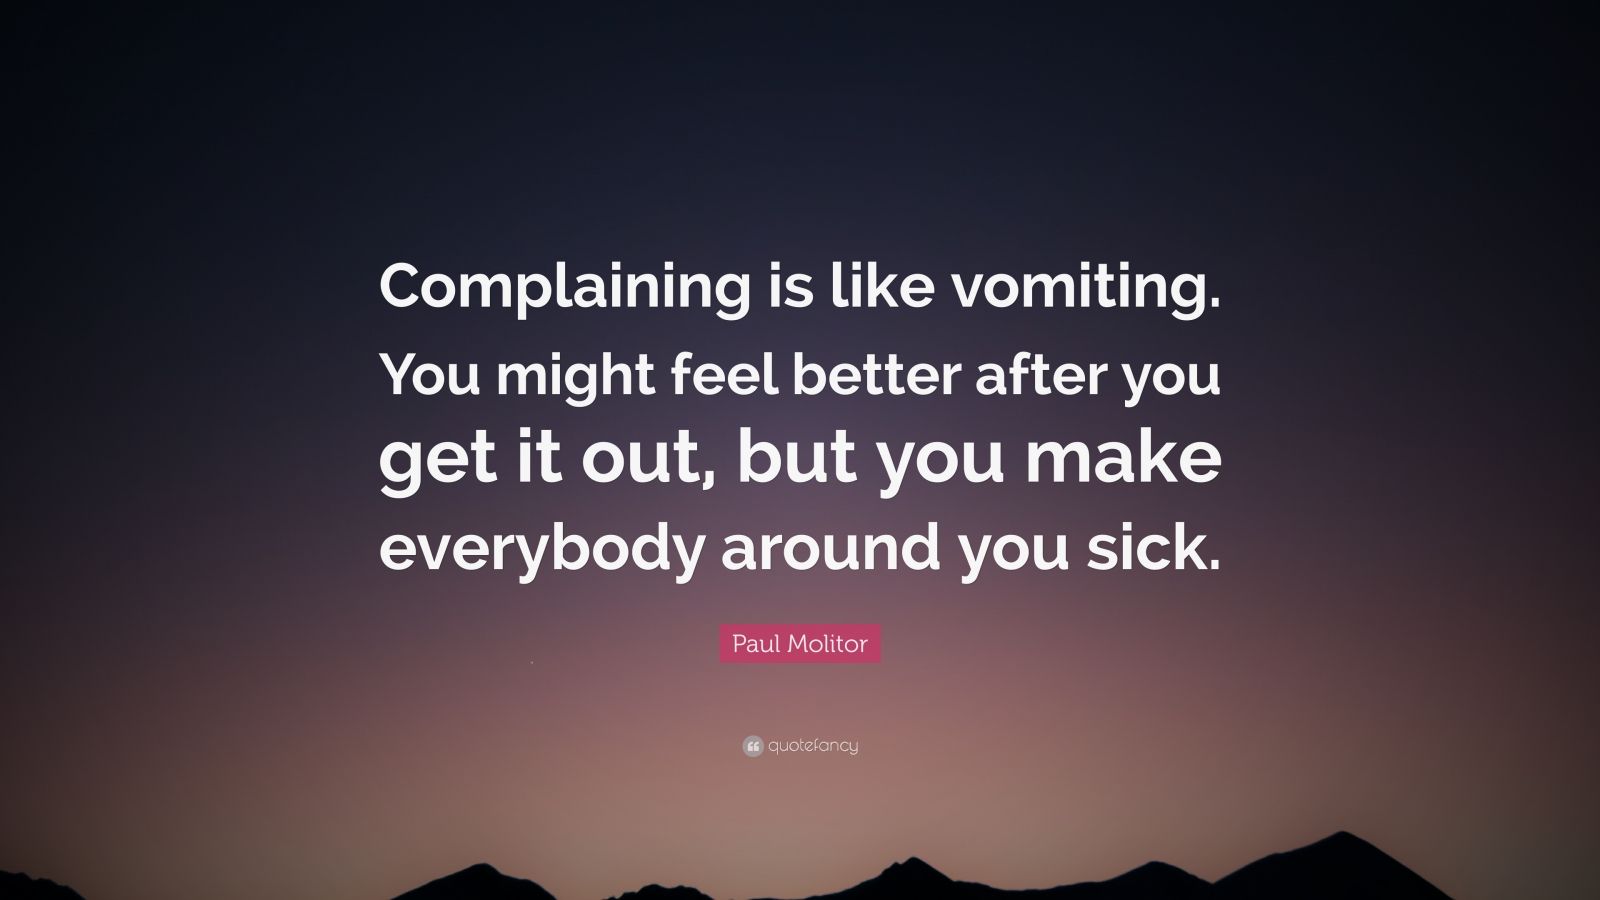 Paul Molitor Quote: “Complaining is like vomiting. You might feel